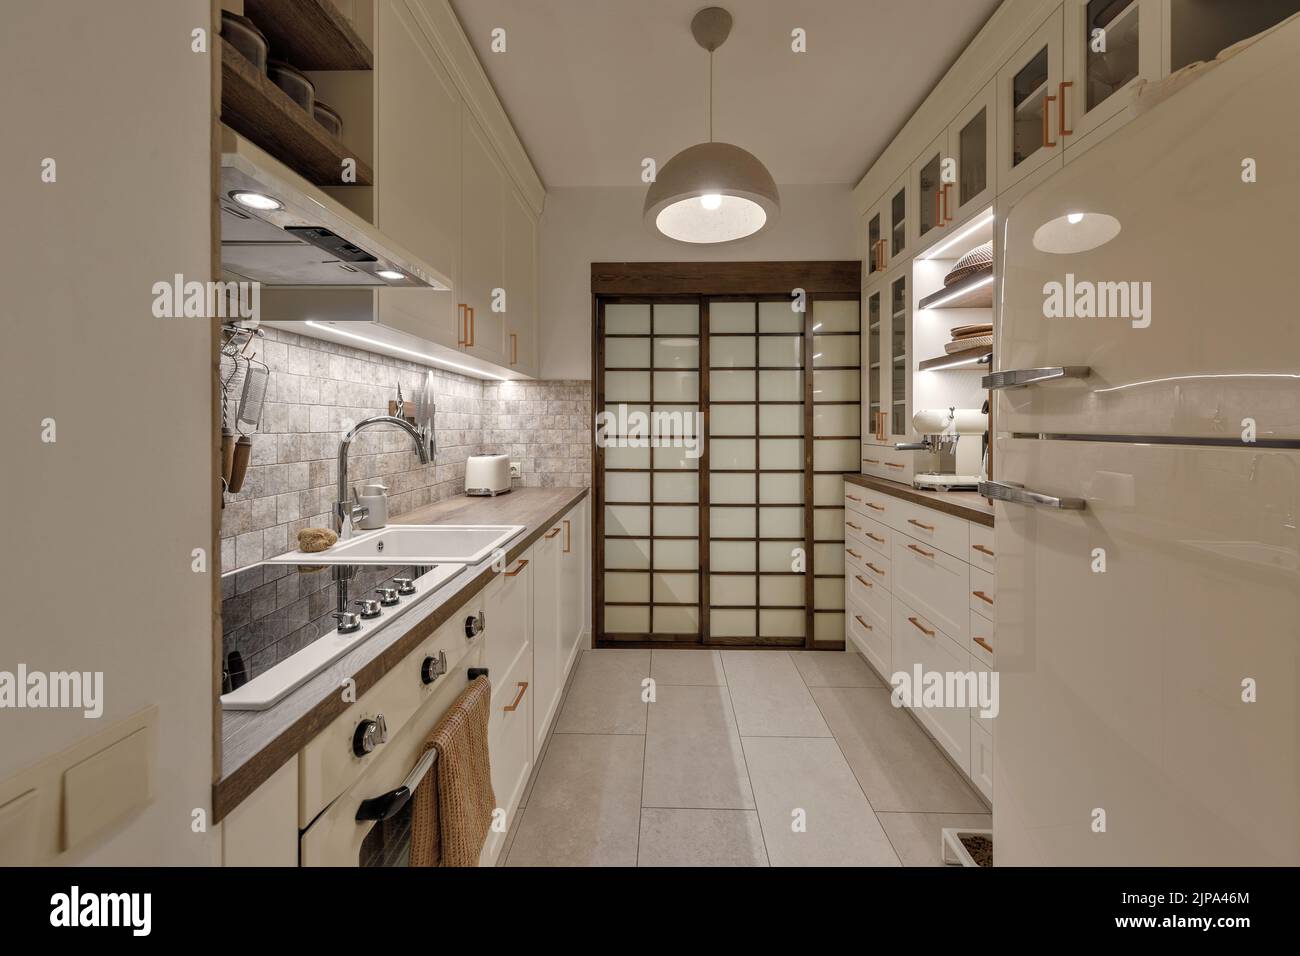 Modern Japandi kitchen interior design in earth tones, natural textures with wooden solid oak furniture and sliding Japanese wood doors. Japandi conce Stock Photo